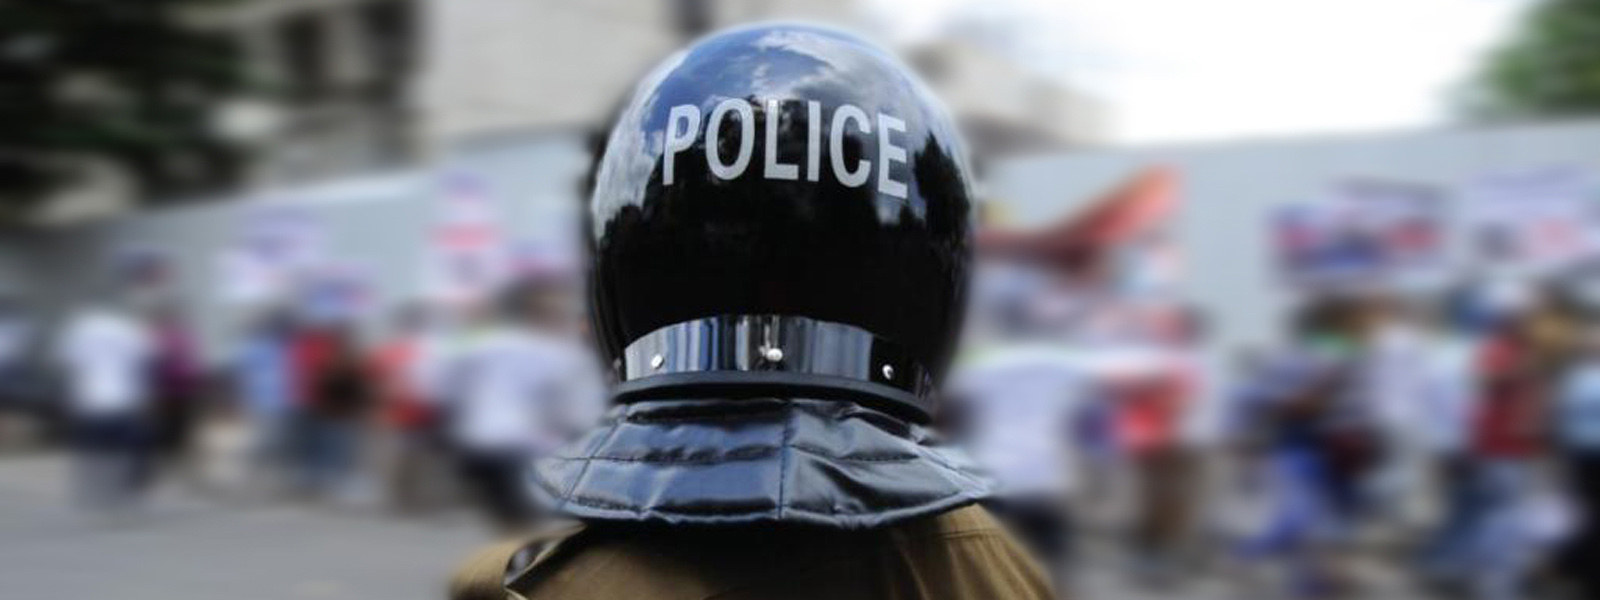 Police curfew in Kandy district reimposed